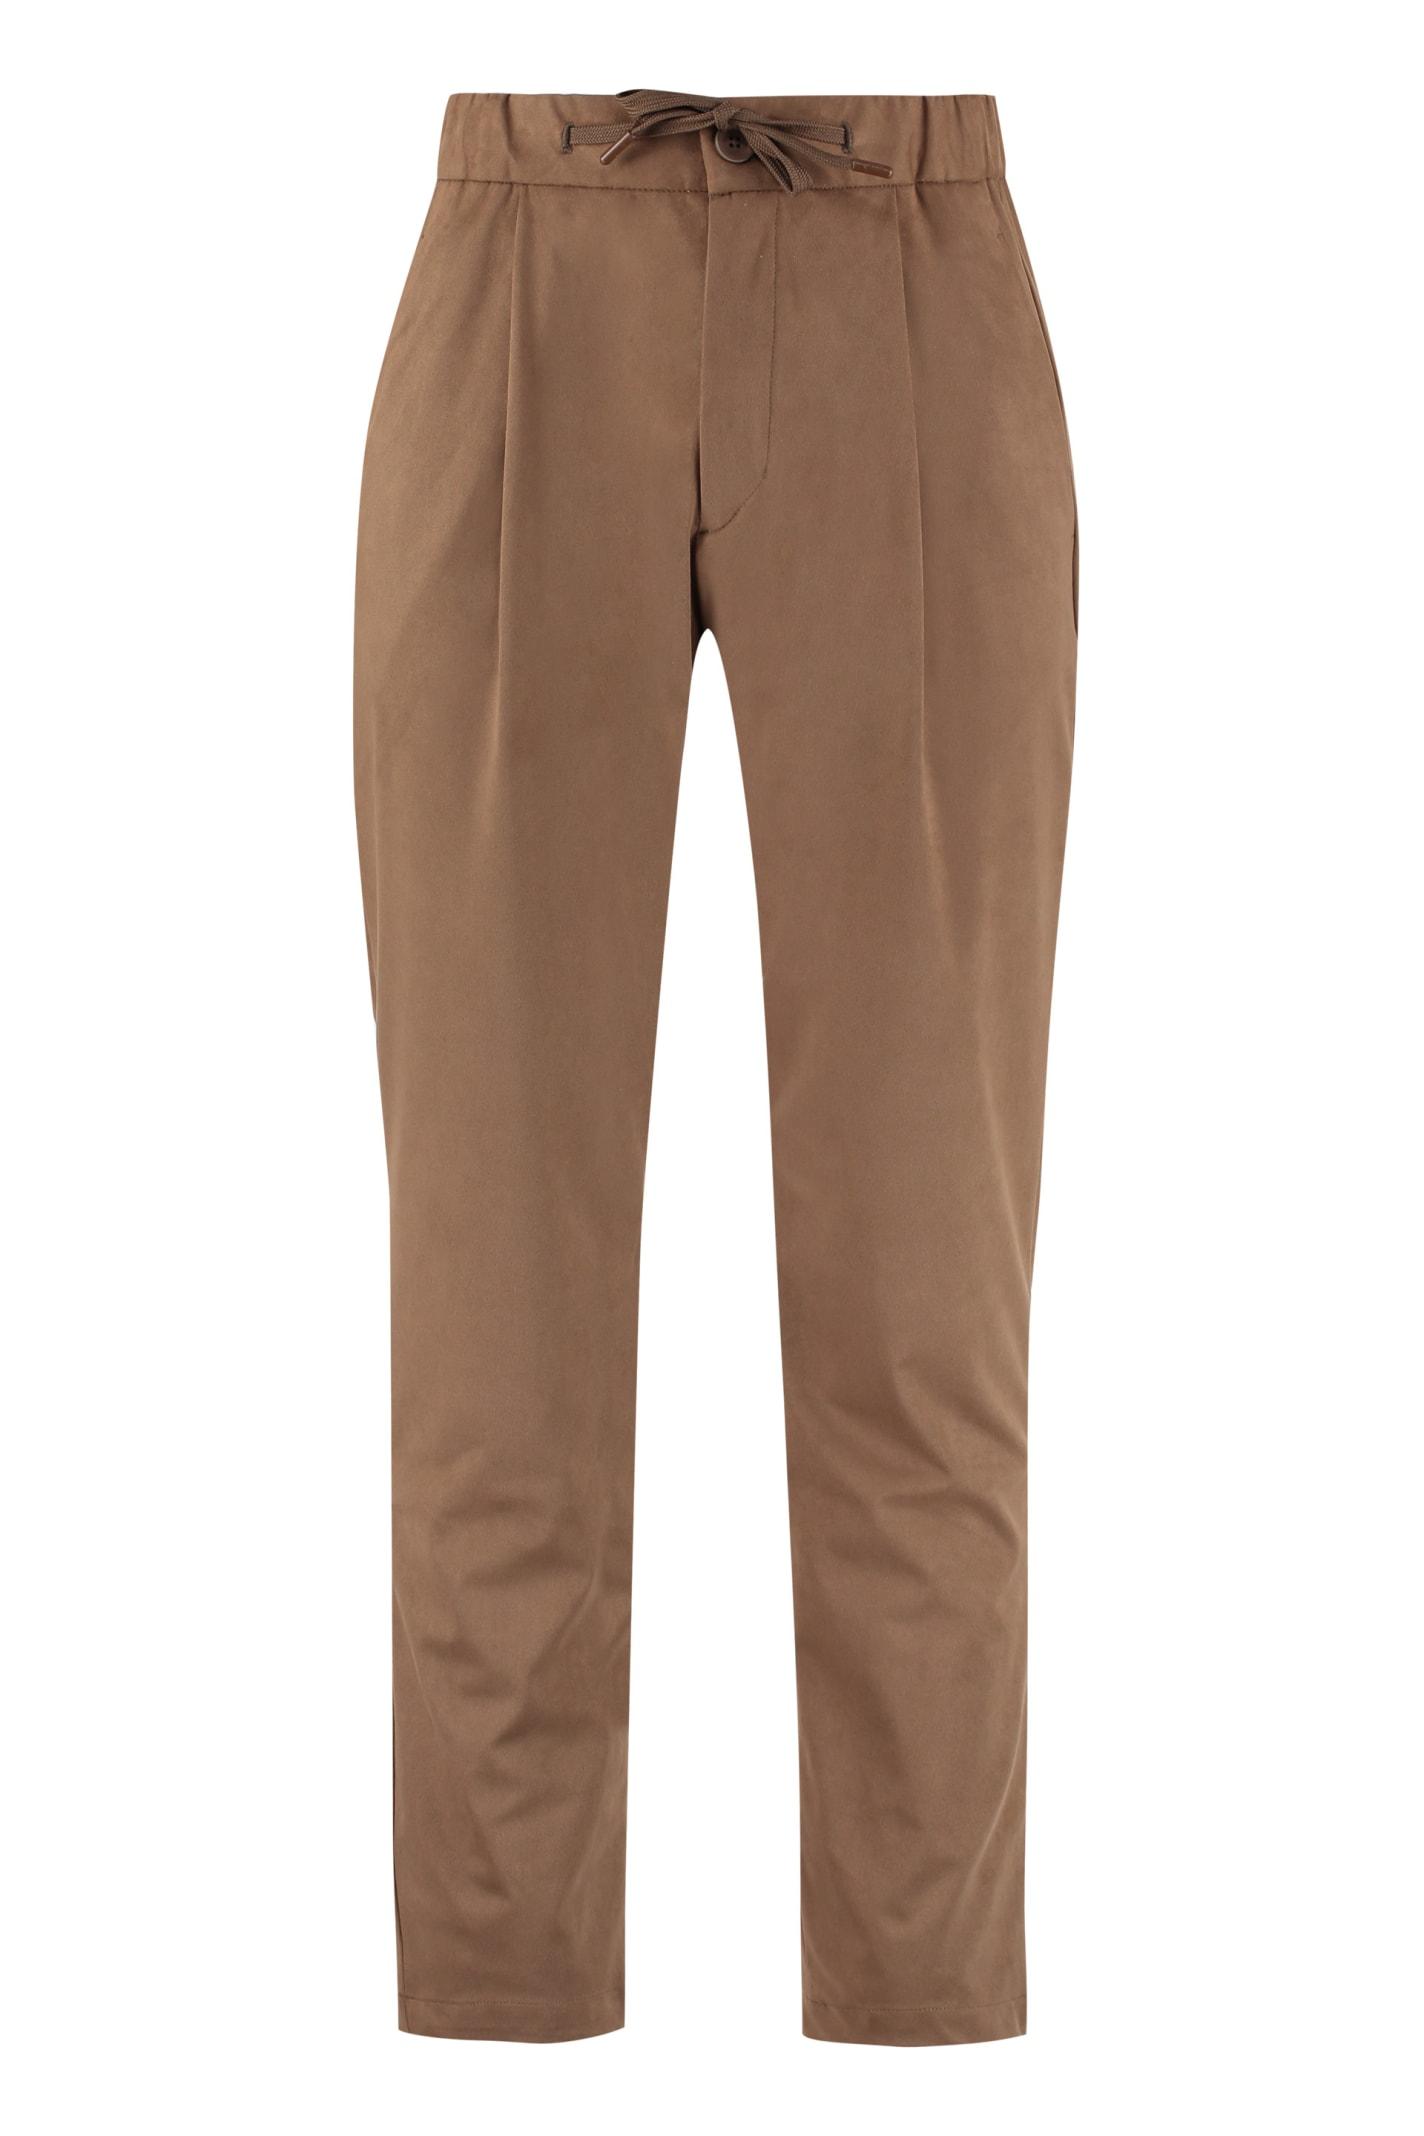 Mens Trousers Save 22% Slacks and Chinos Herno Eco-suede Trousers for Men Slacks and Chinos Herno Trousers 